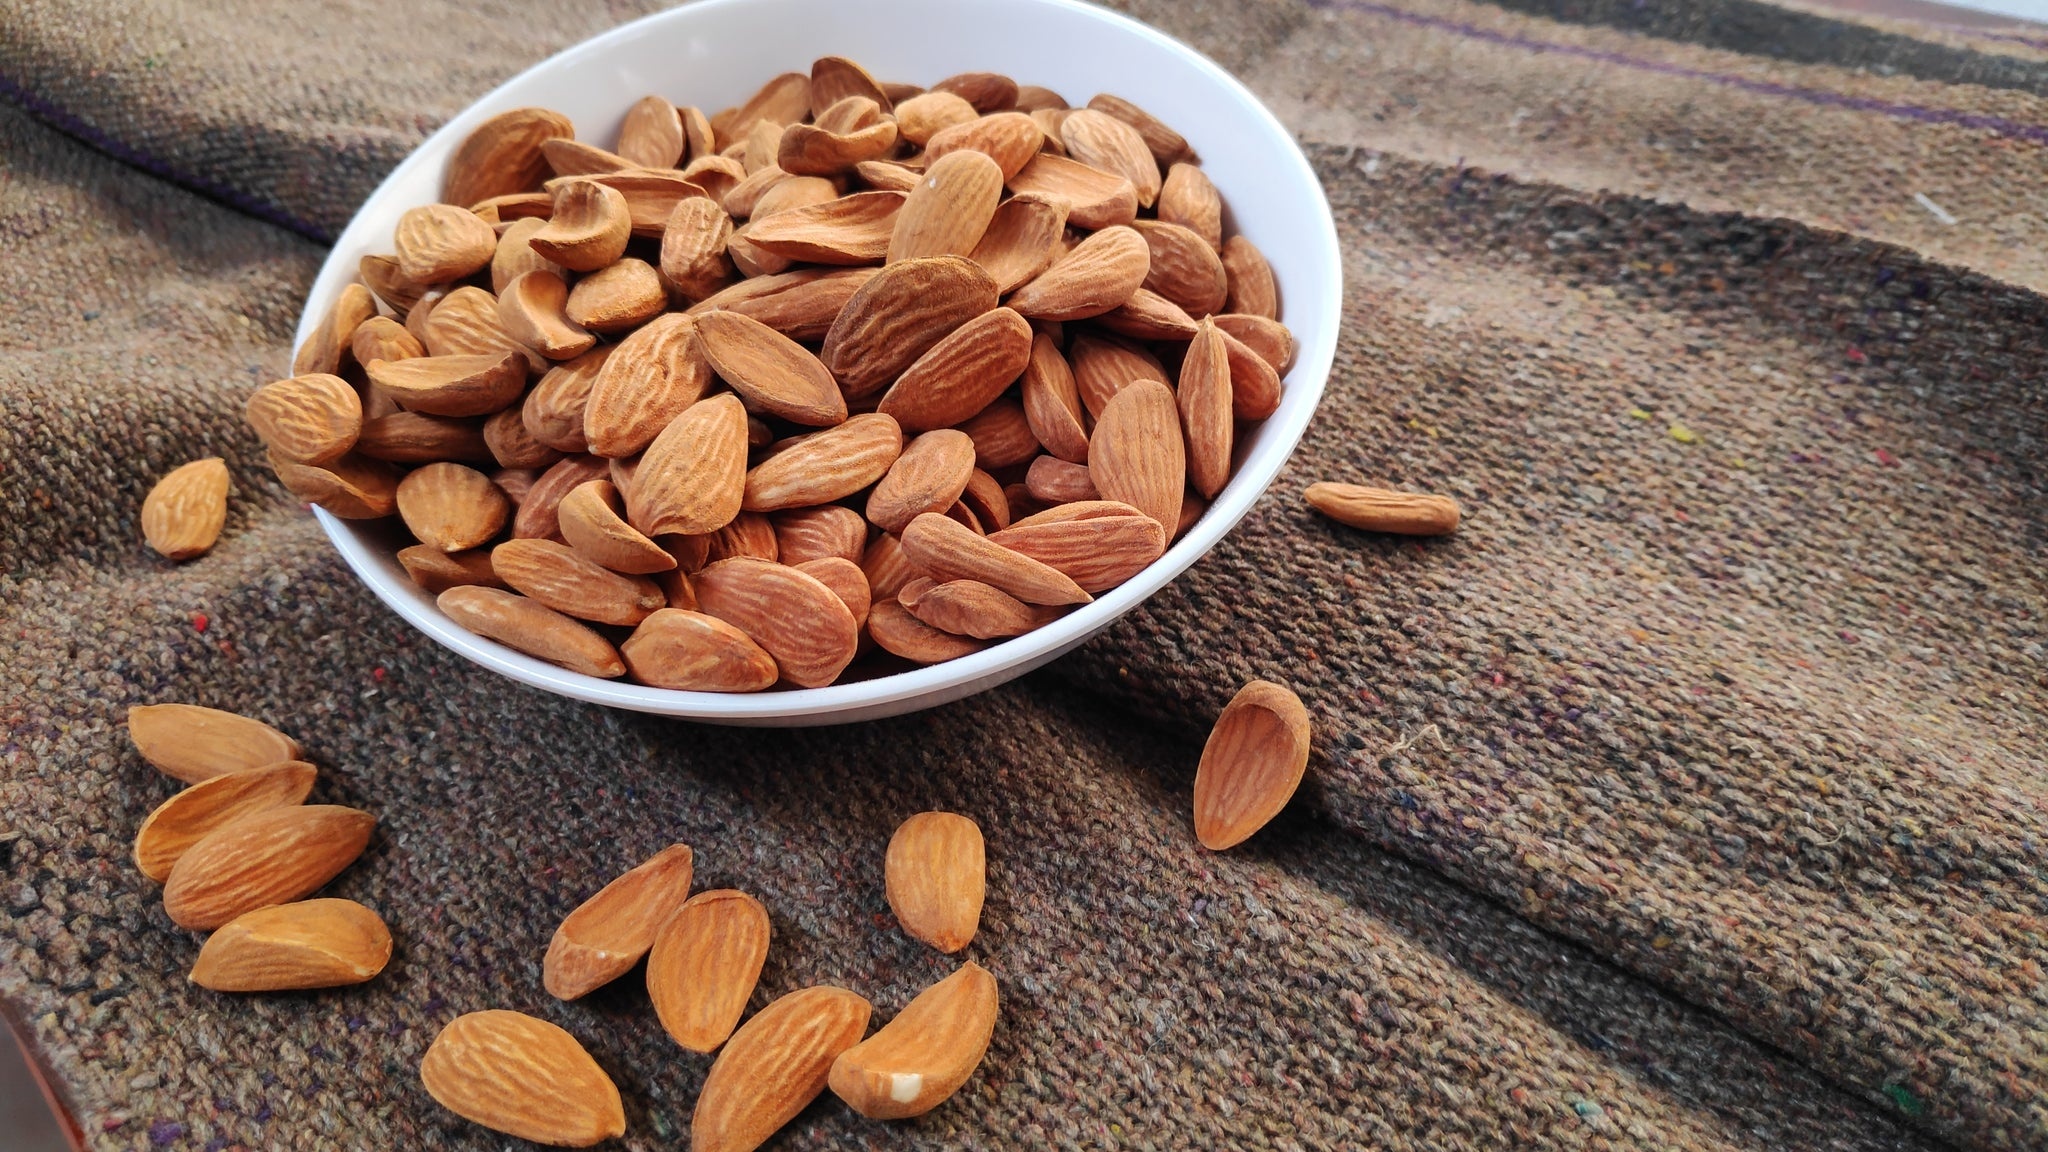 Free almond images, Nutty goodness, Nutrient-rich, Aesthetic appeal, 2050x1160 HD Desktop